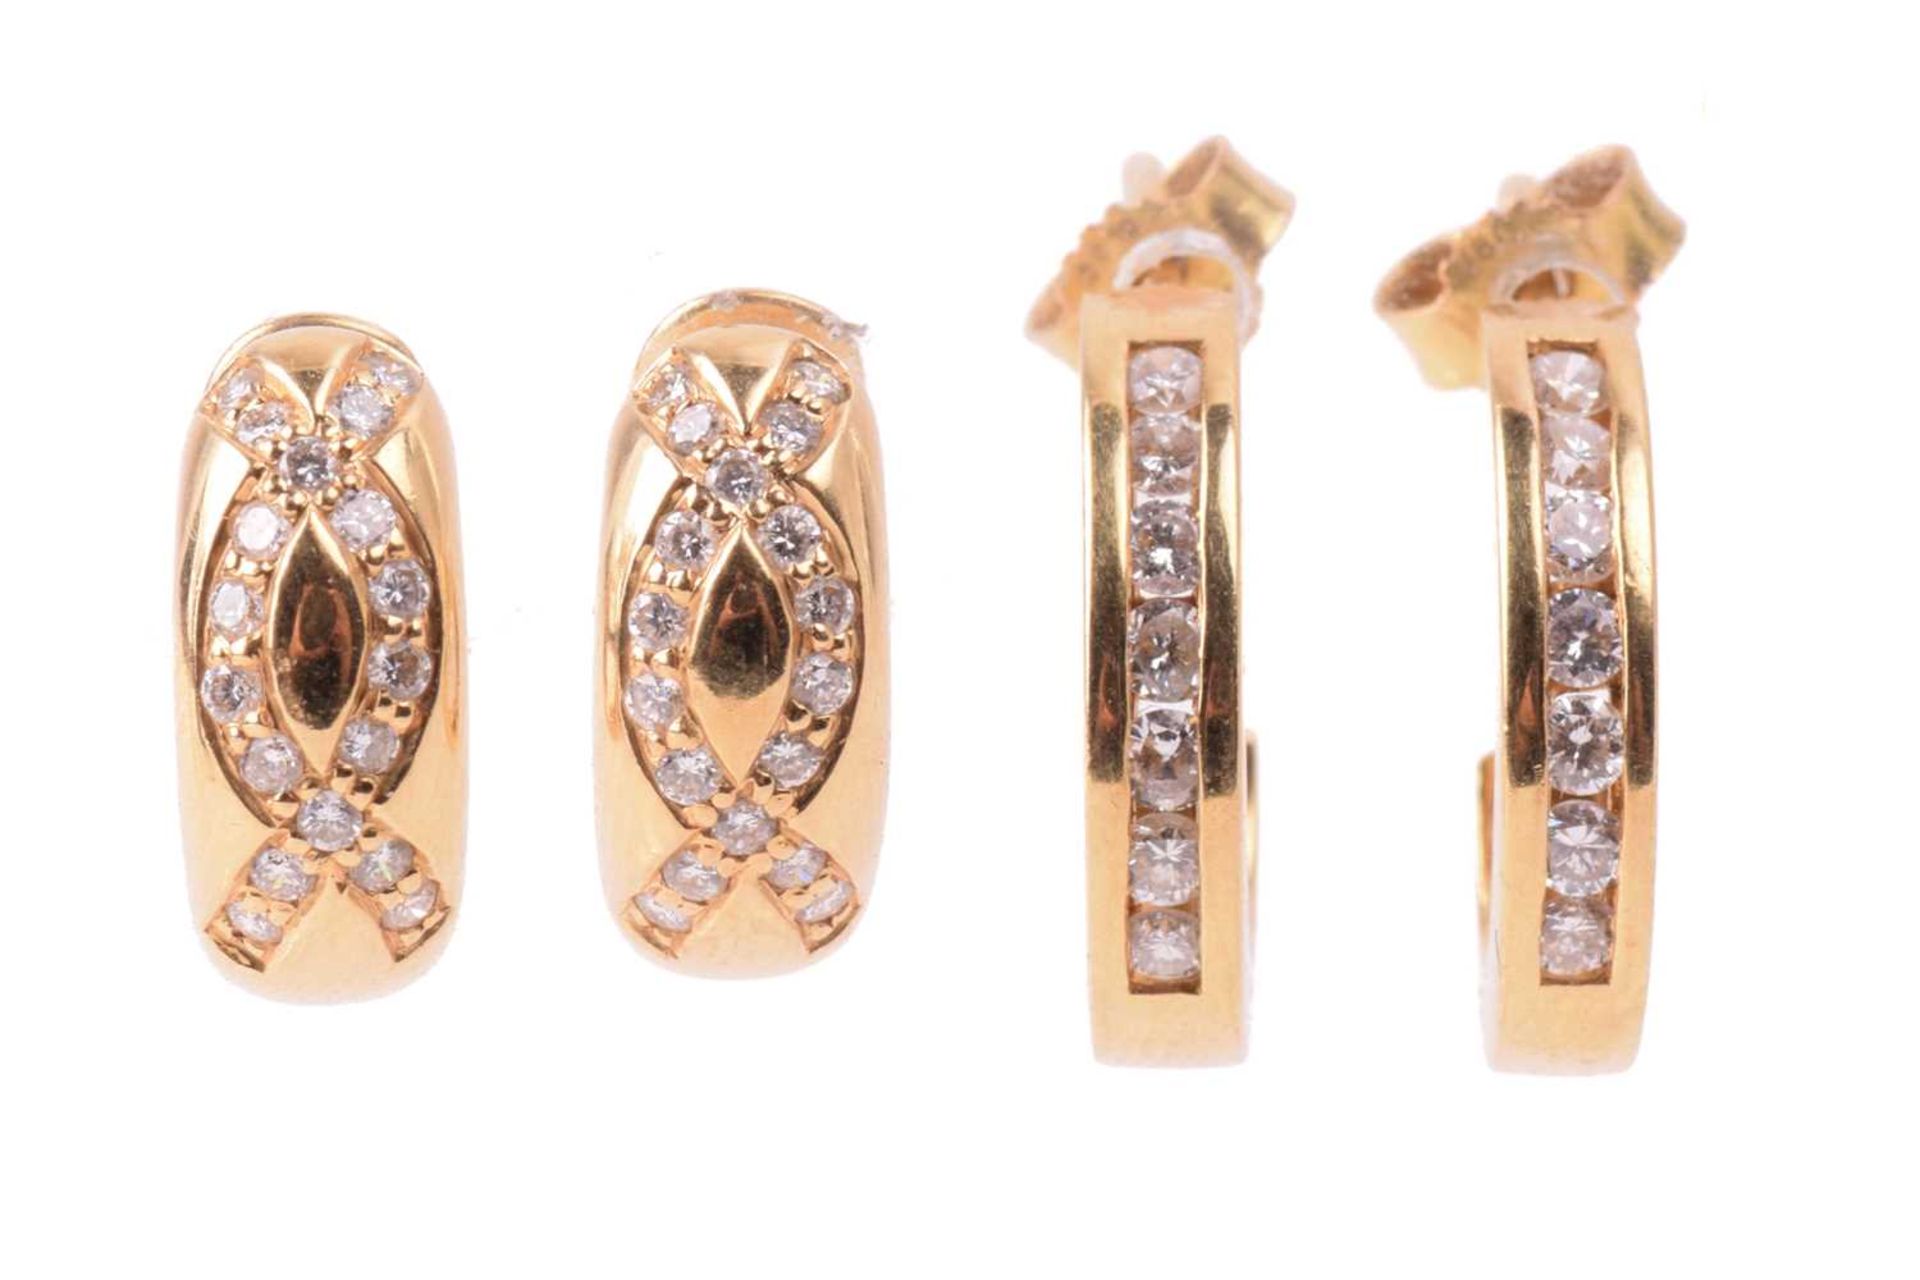 Two pairs of diamond-set hoop earrings in 18ct yellow gold; the first channel-set with diamond